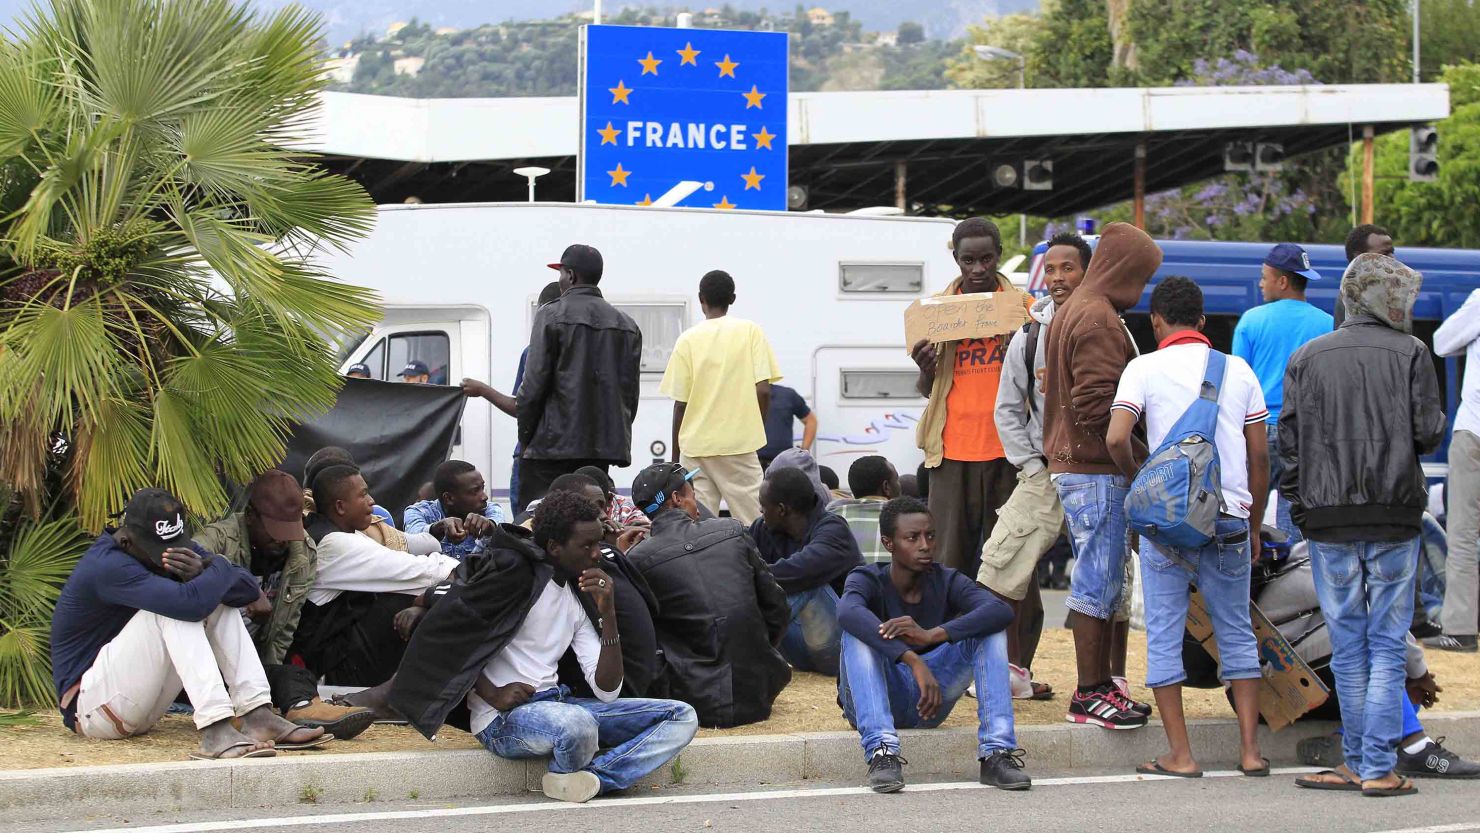 Migrants waiting at the border between Italy and France in the city of Ventimiglia, Italy, in June 2015. 